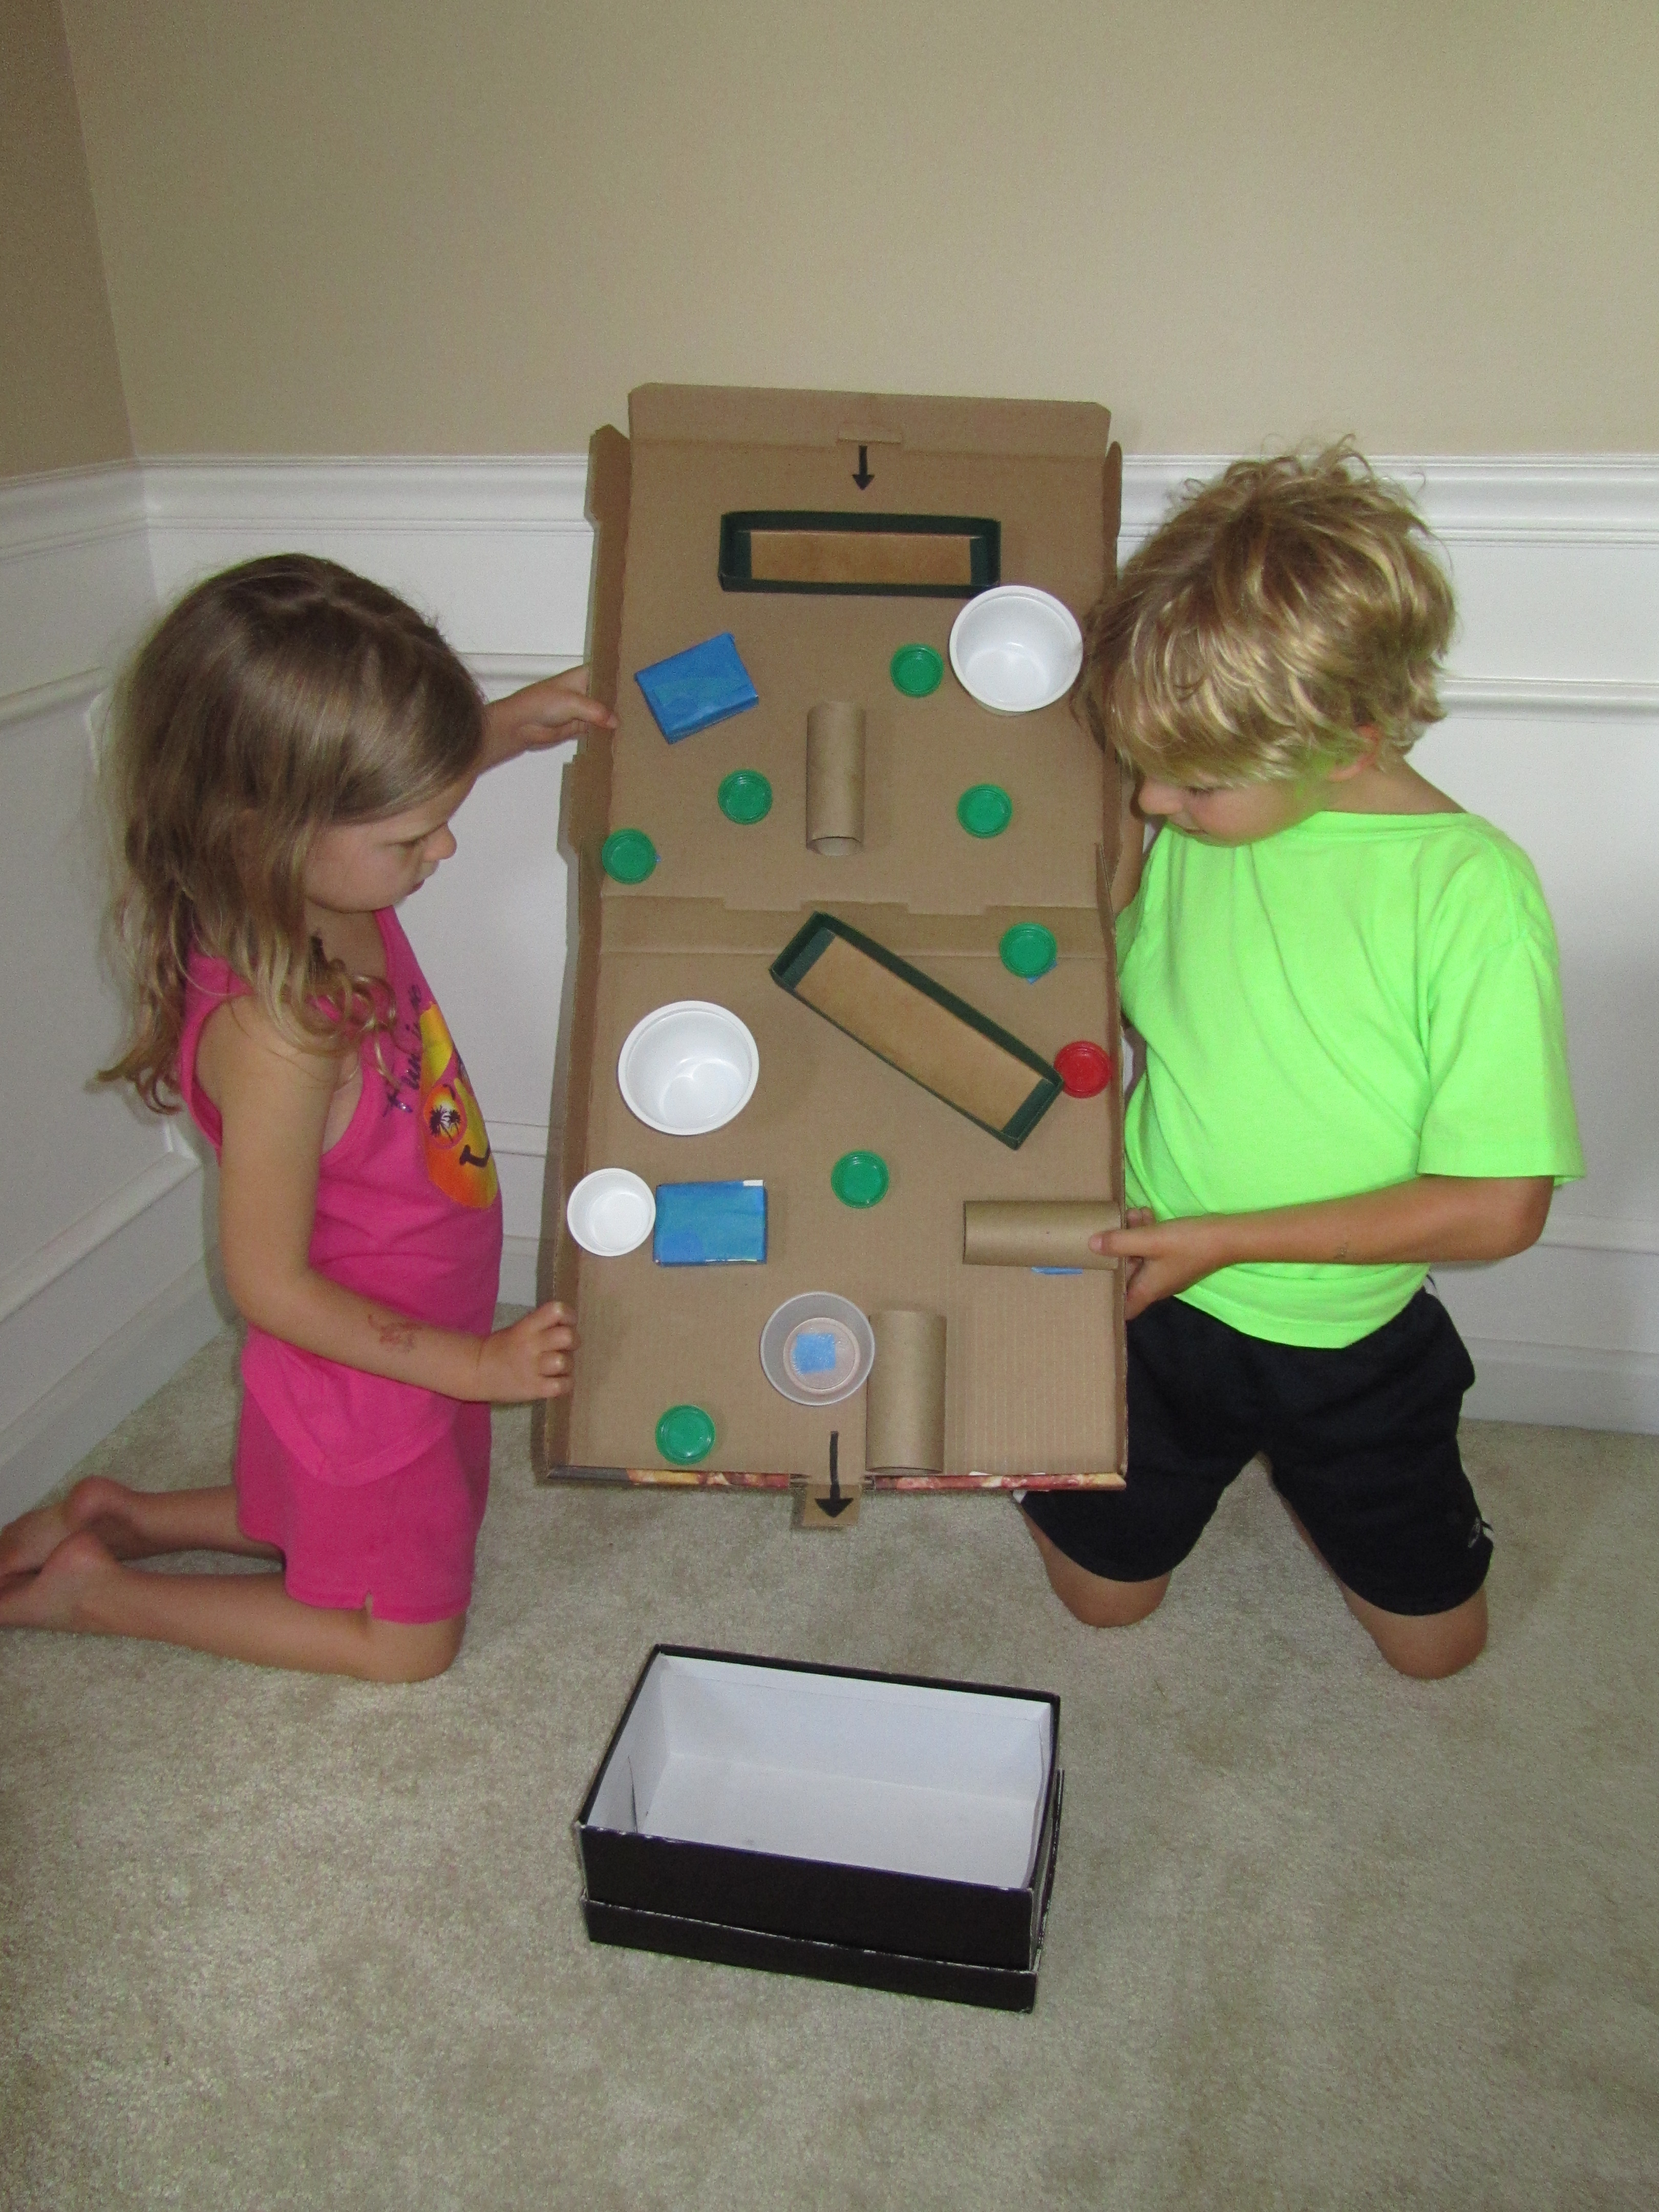 Two children work coopertively to move the red cap through a maze created from recycled plastic and cardboard materials